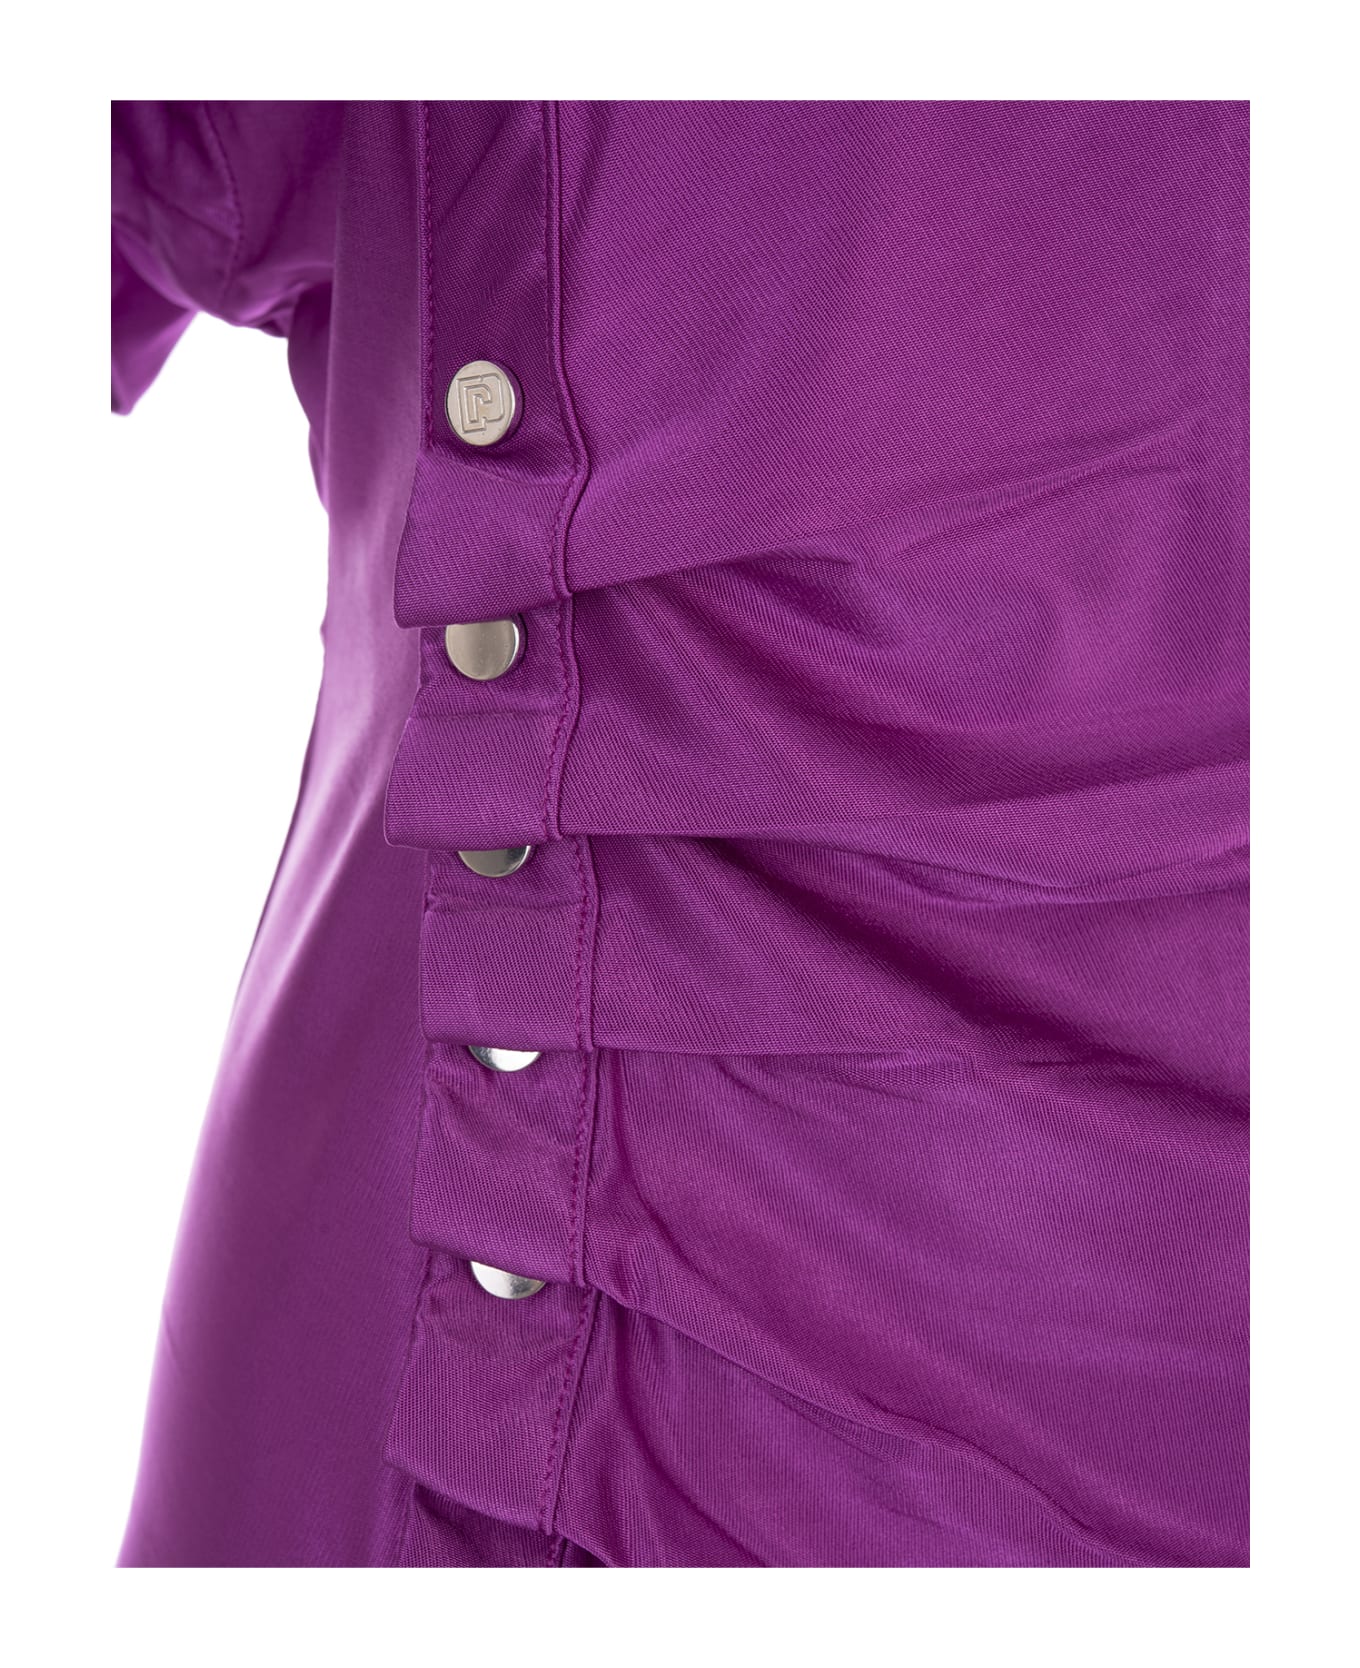 Paco Rabanne Purple Top With Draping And Buttons - Purple